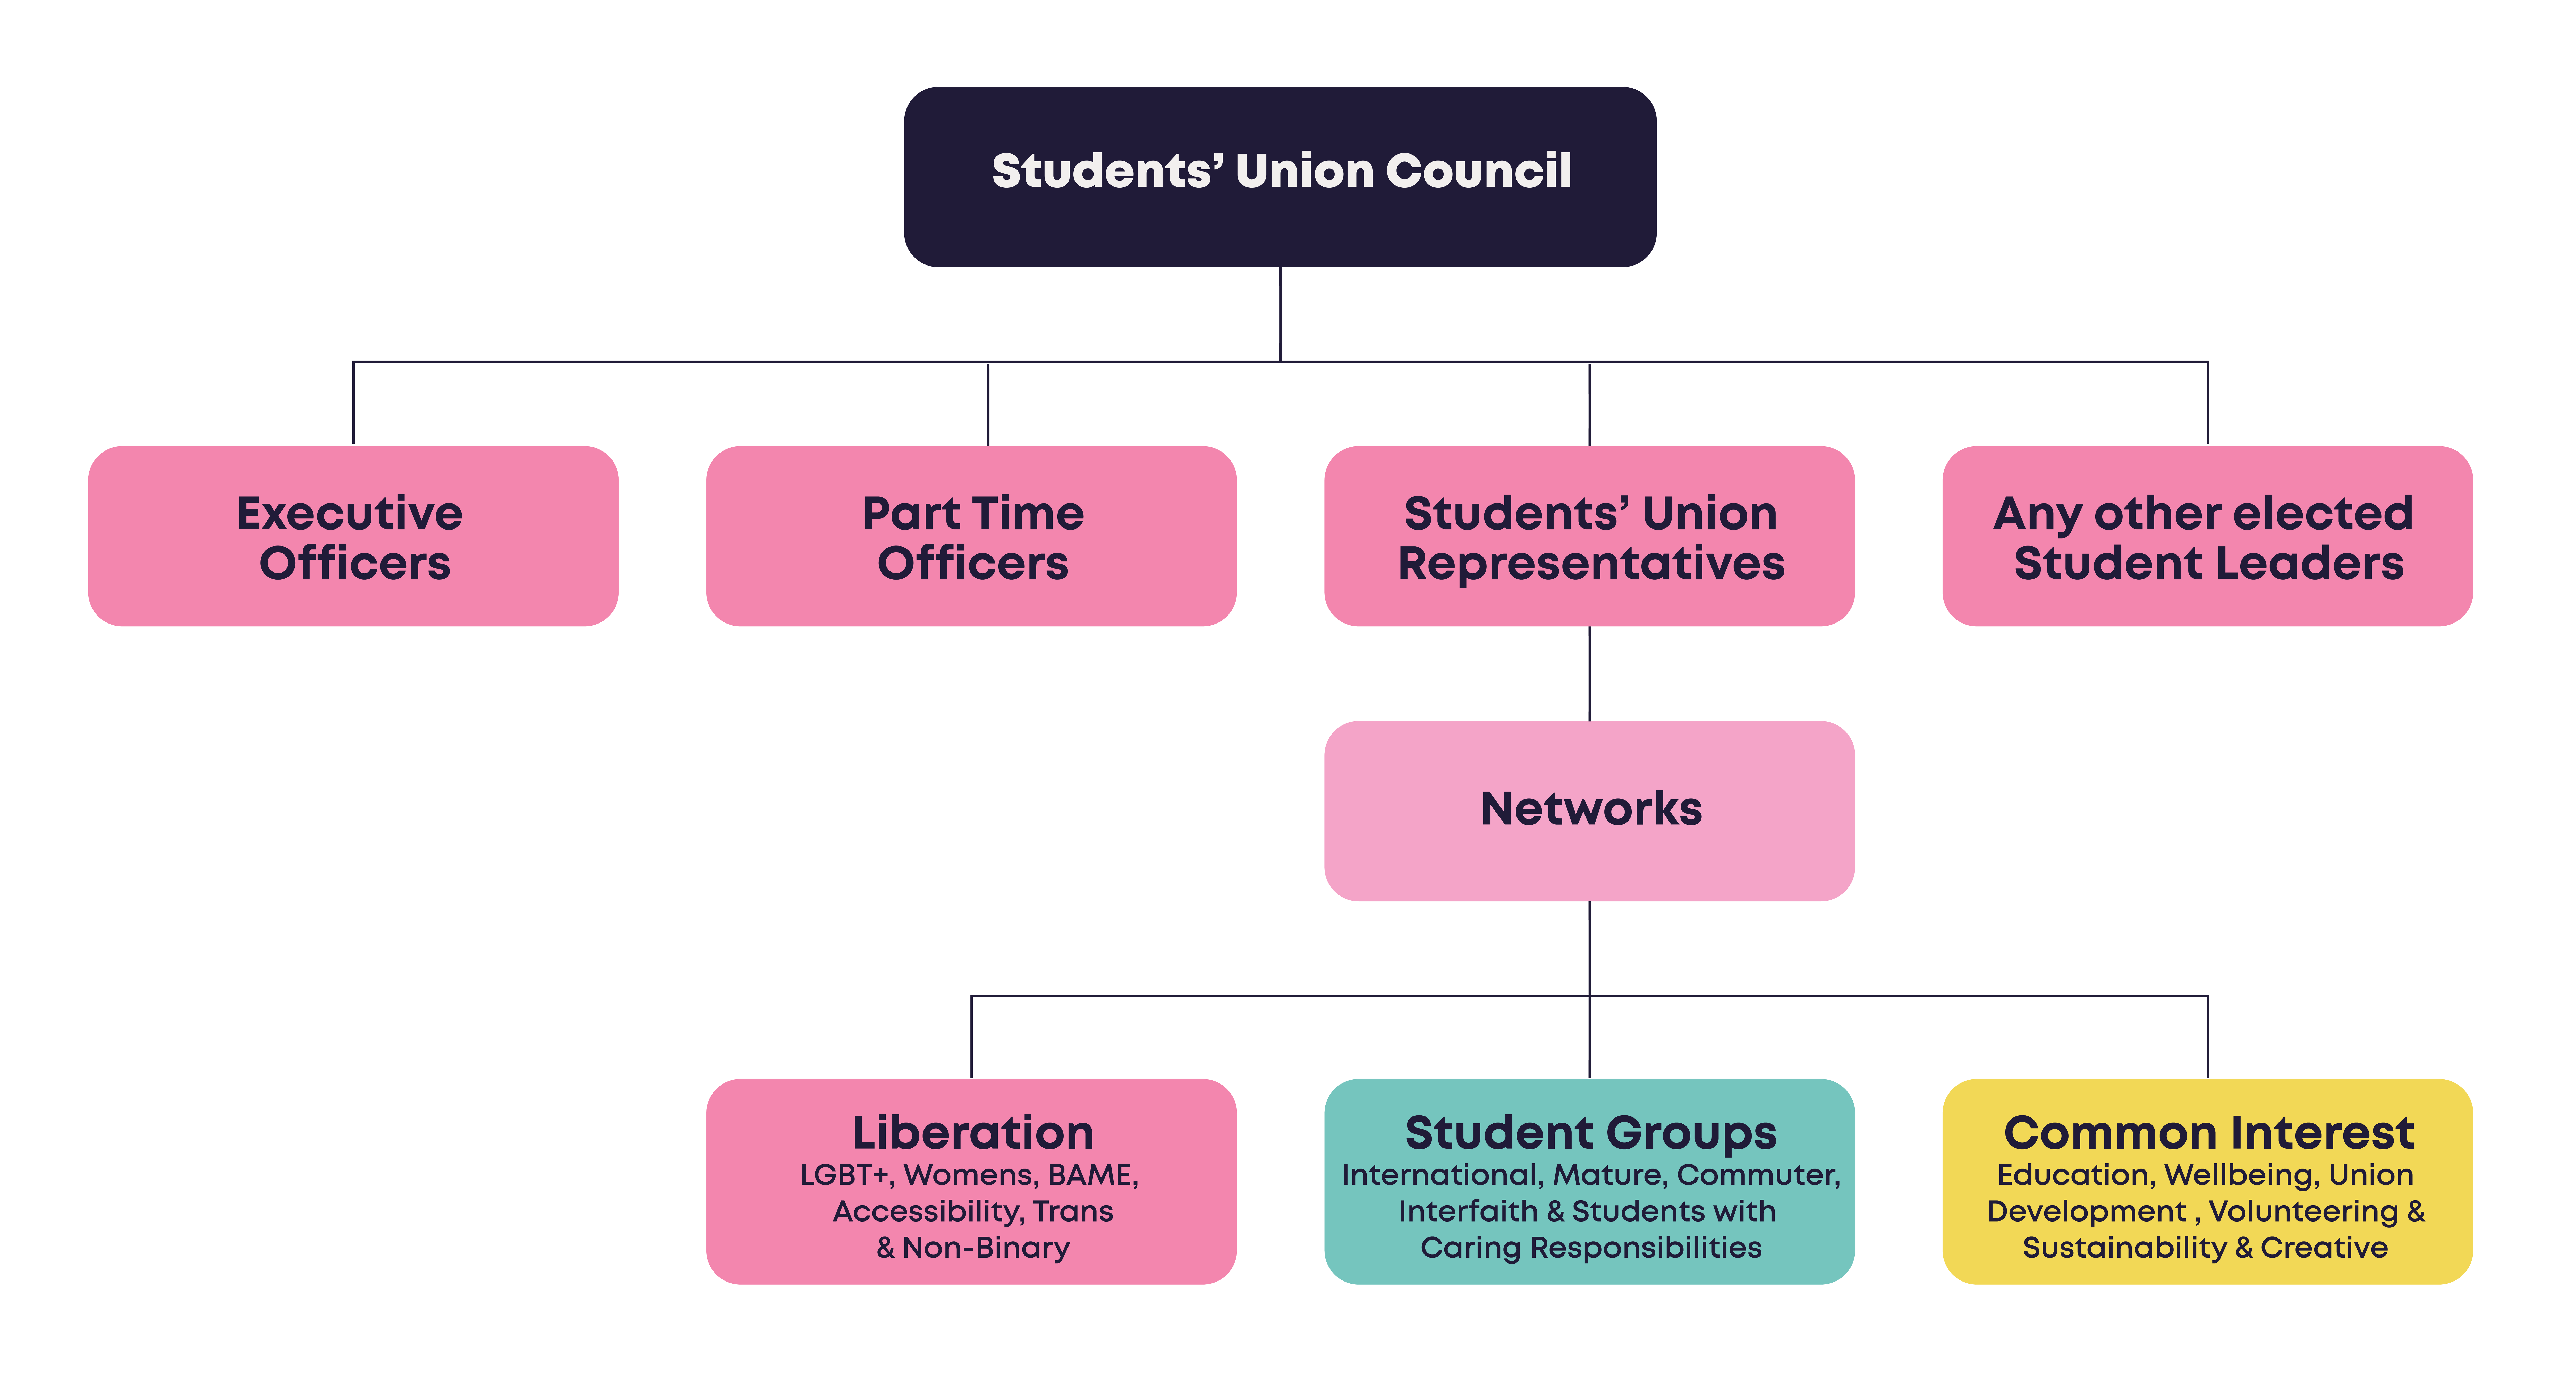 Top Row: Students' Union Council, Below: Executive officers, Part-Time Officers, Students' Union Representatives, Any other elected Student Leaders - Below representatives: Networks, linking: Liberation -  LGBT+, Women, BAME, Accessibility, Trans and Non-Binary - Student Groups: International, Mature, Commuter, Interfaith and Students with Caring Responsibilities - Common Interest: Education, Wellbeing, Union Development, Volunteering and Sustainability and creative 